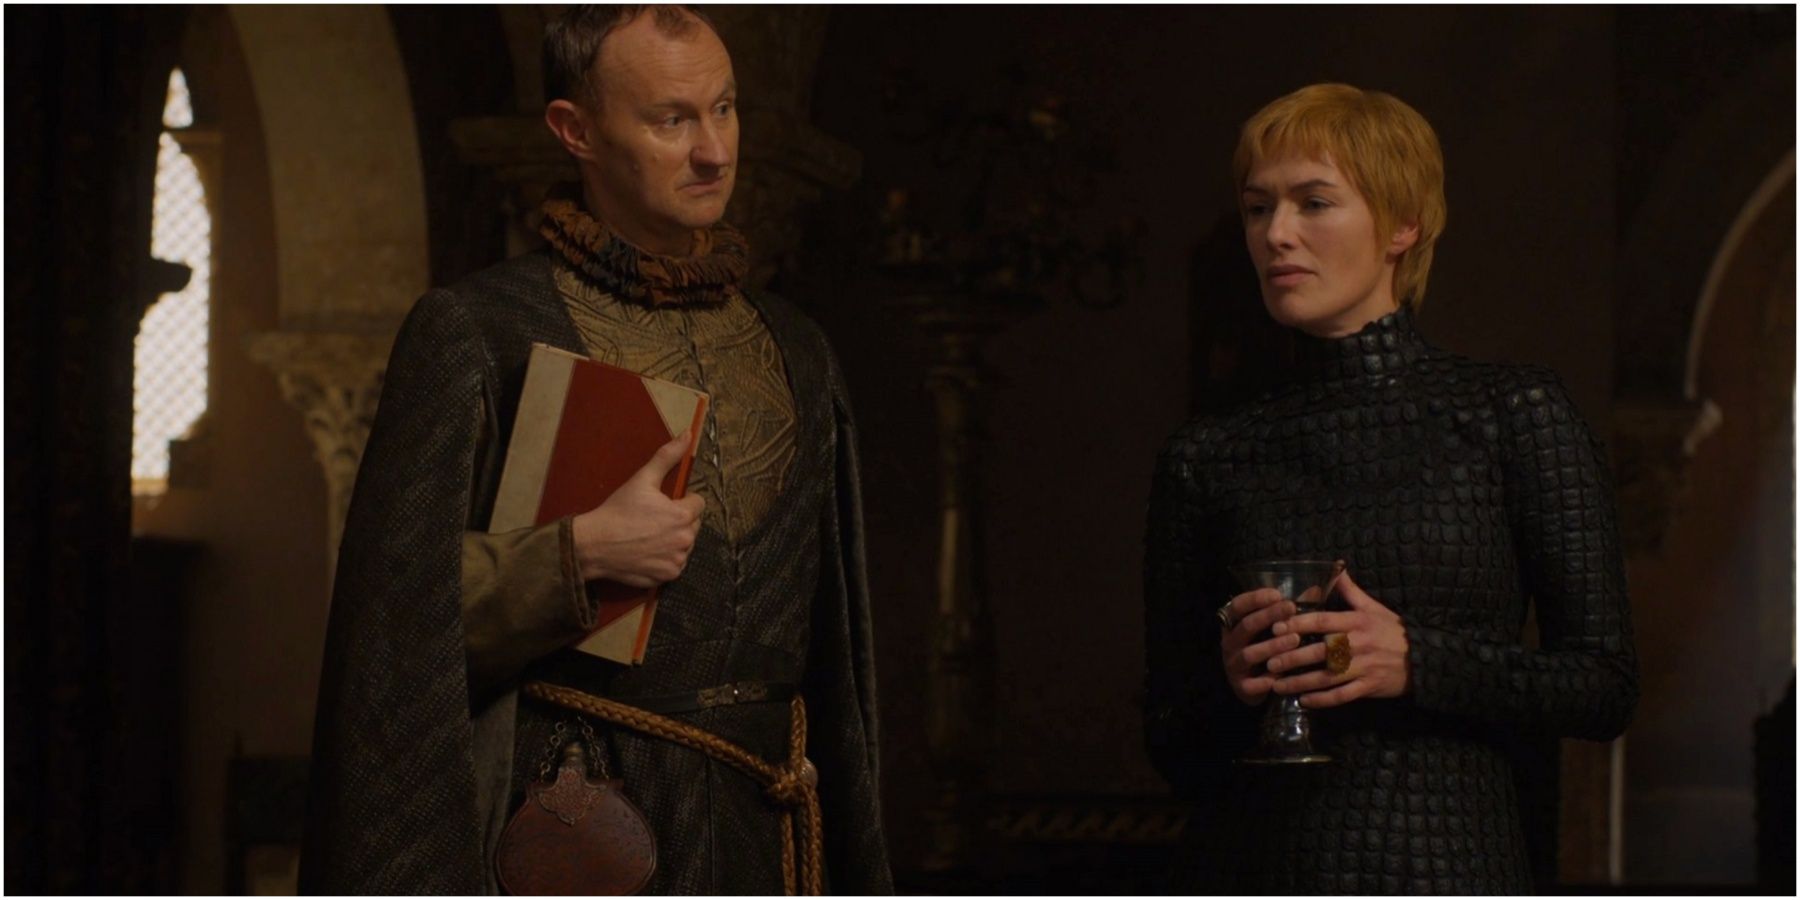 Tycho Nestoris and Cersei Lannister in Game of Thrones.